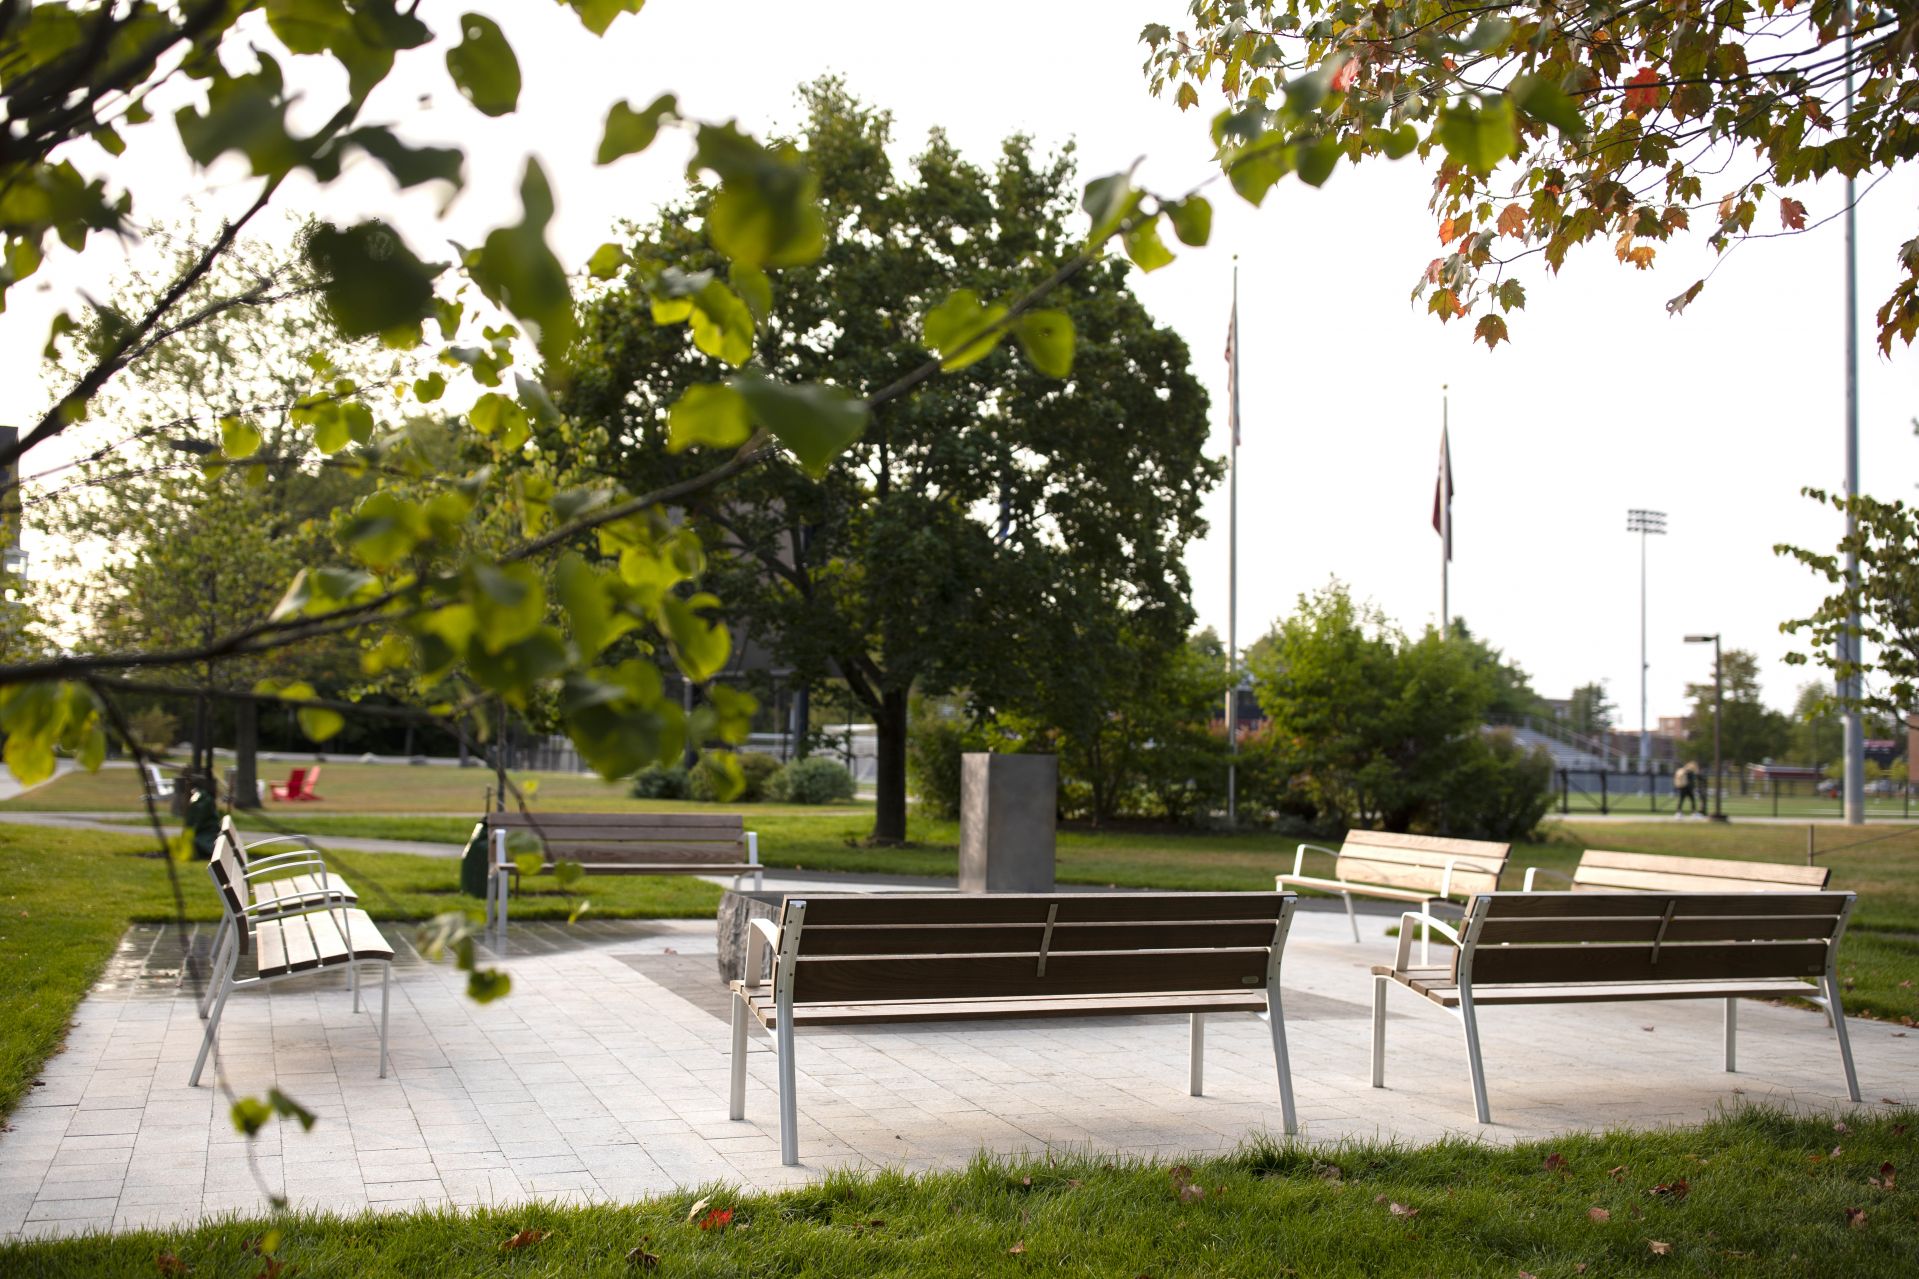 Campus scenes on Tuesday, Sept. 15, 2020.

Veterans Plaza in the early morning.